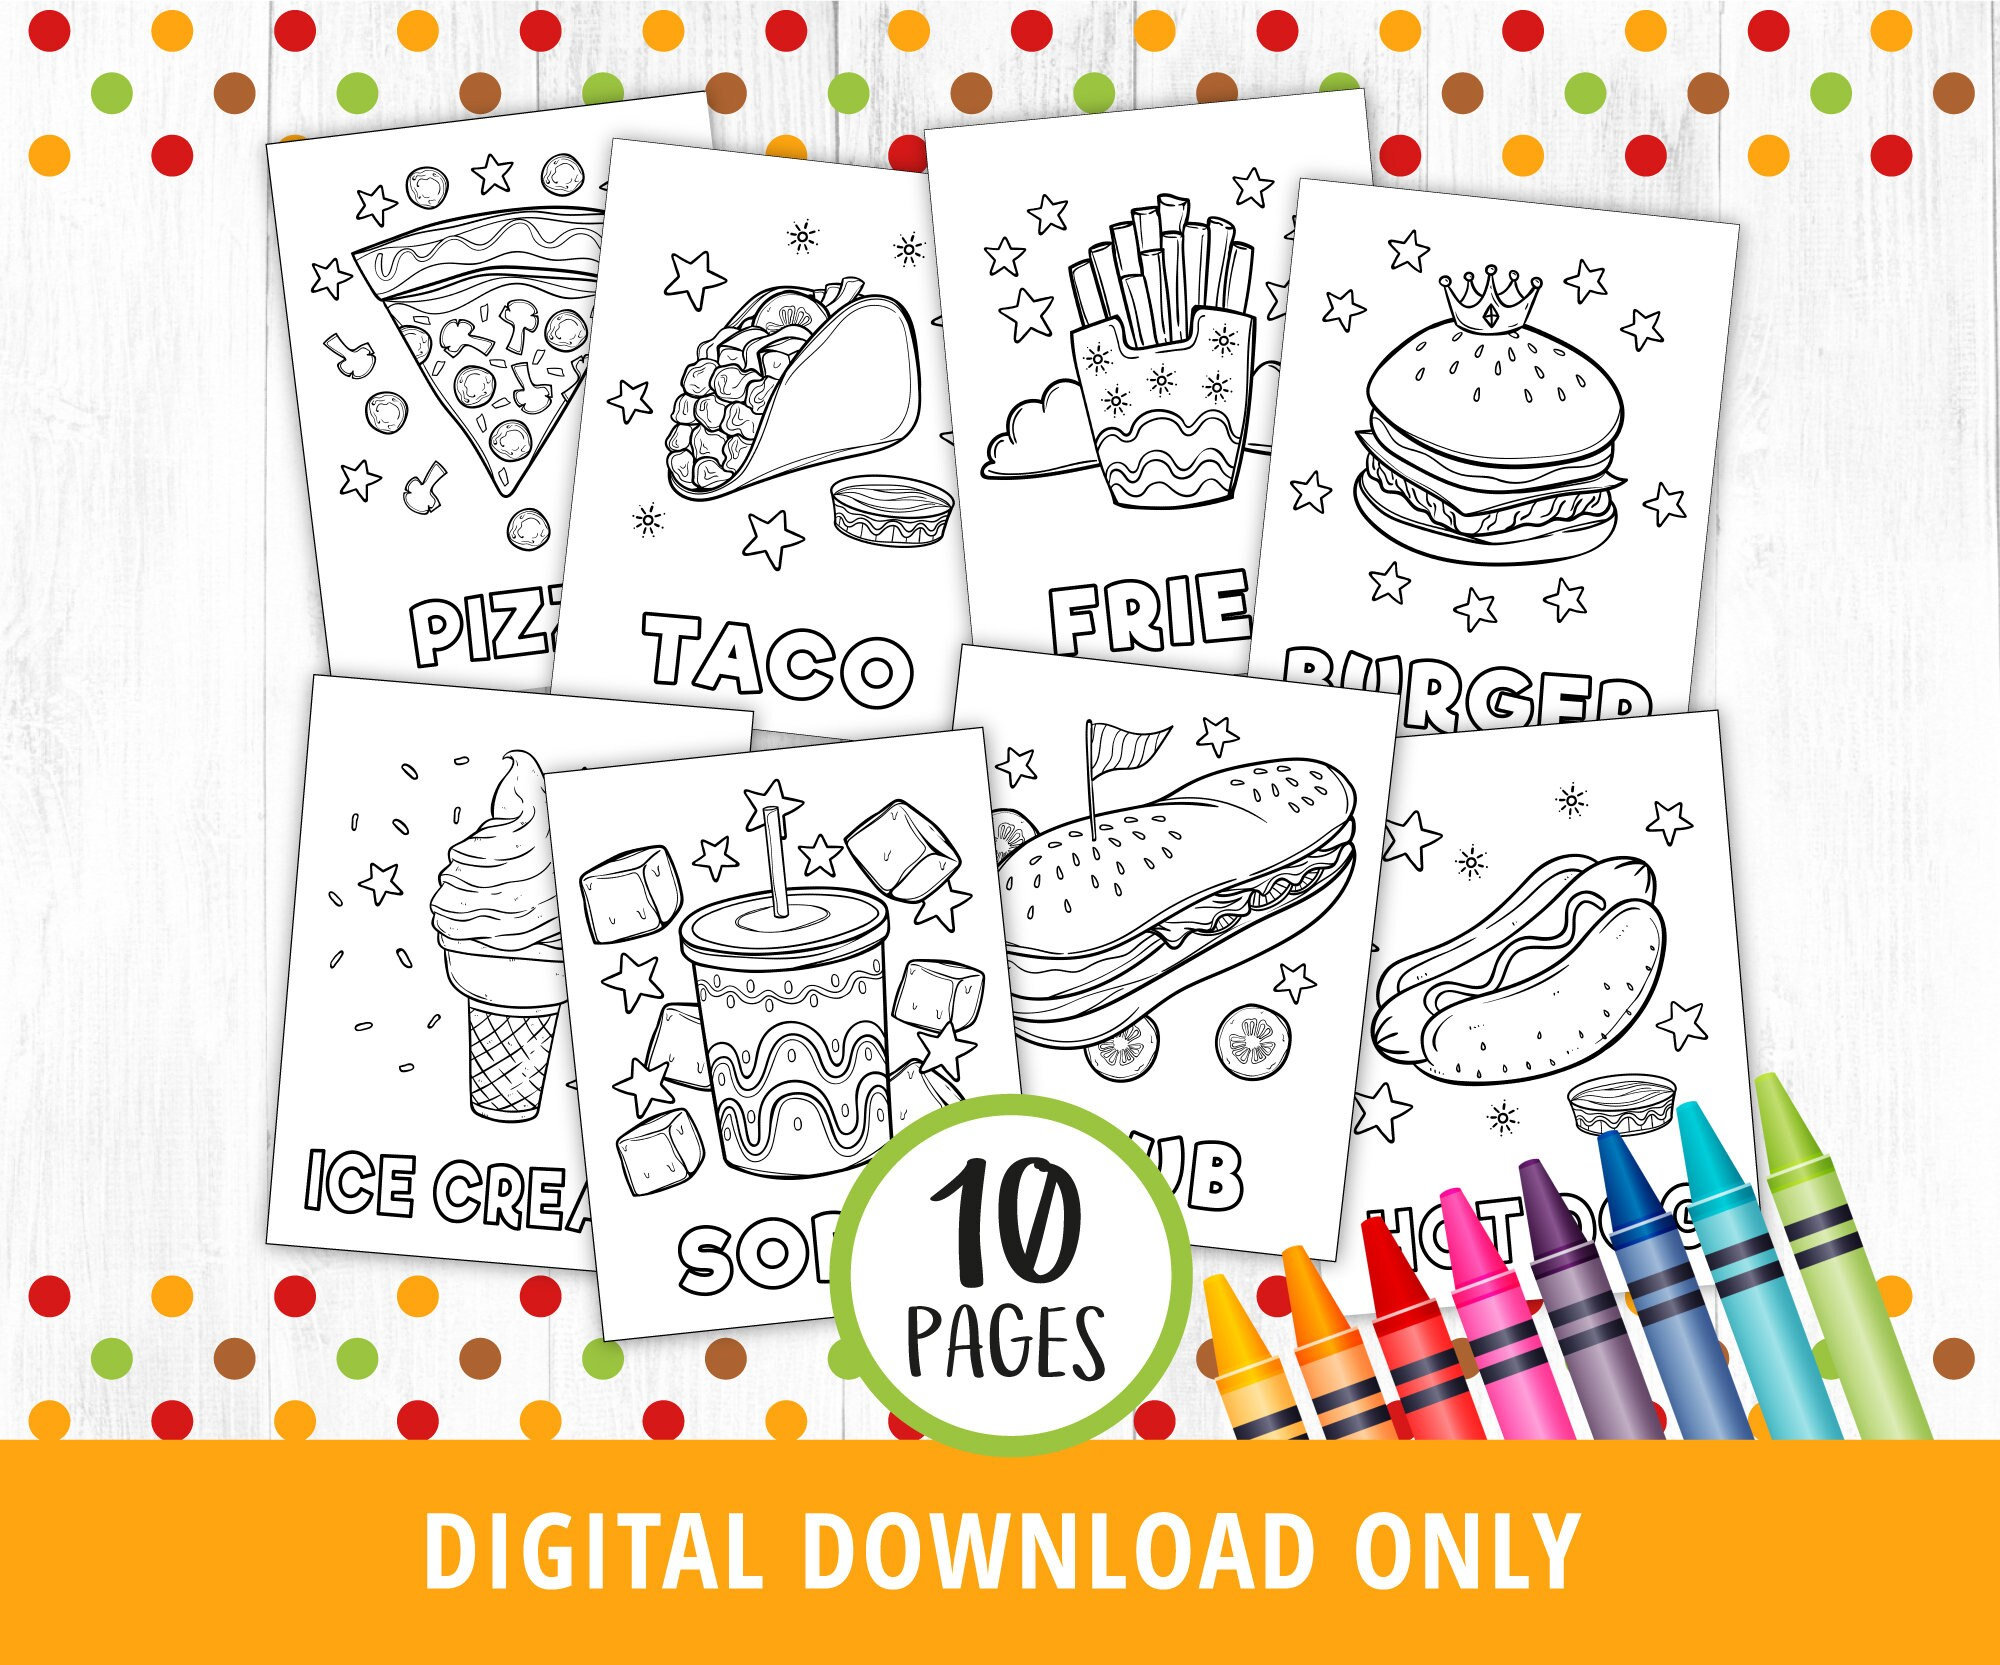 Fast food coloring pages food coloring pages printable coloring pages junk food burger hot dog pizza ice cream soda taco digital